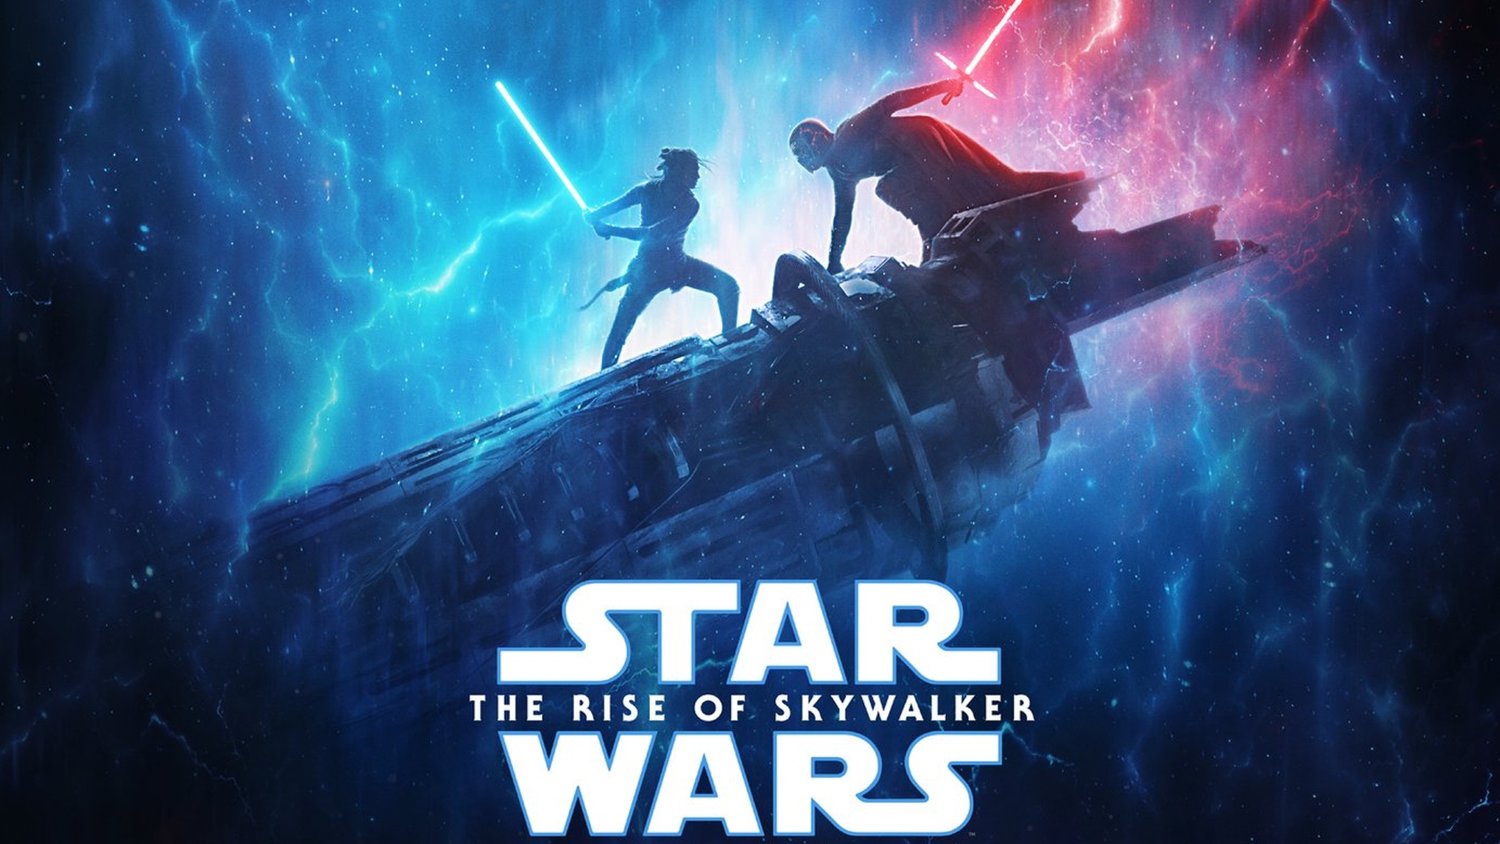 lucasfilm-releases-a-cool-new-poster-for-star-wars-the-rise-of-skywalker-social.jpg